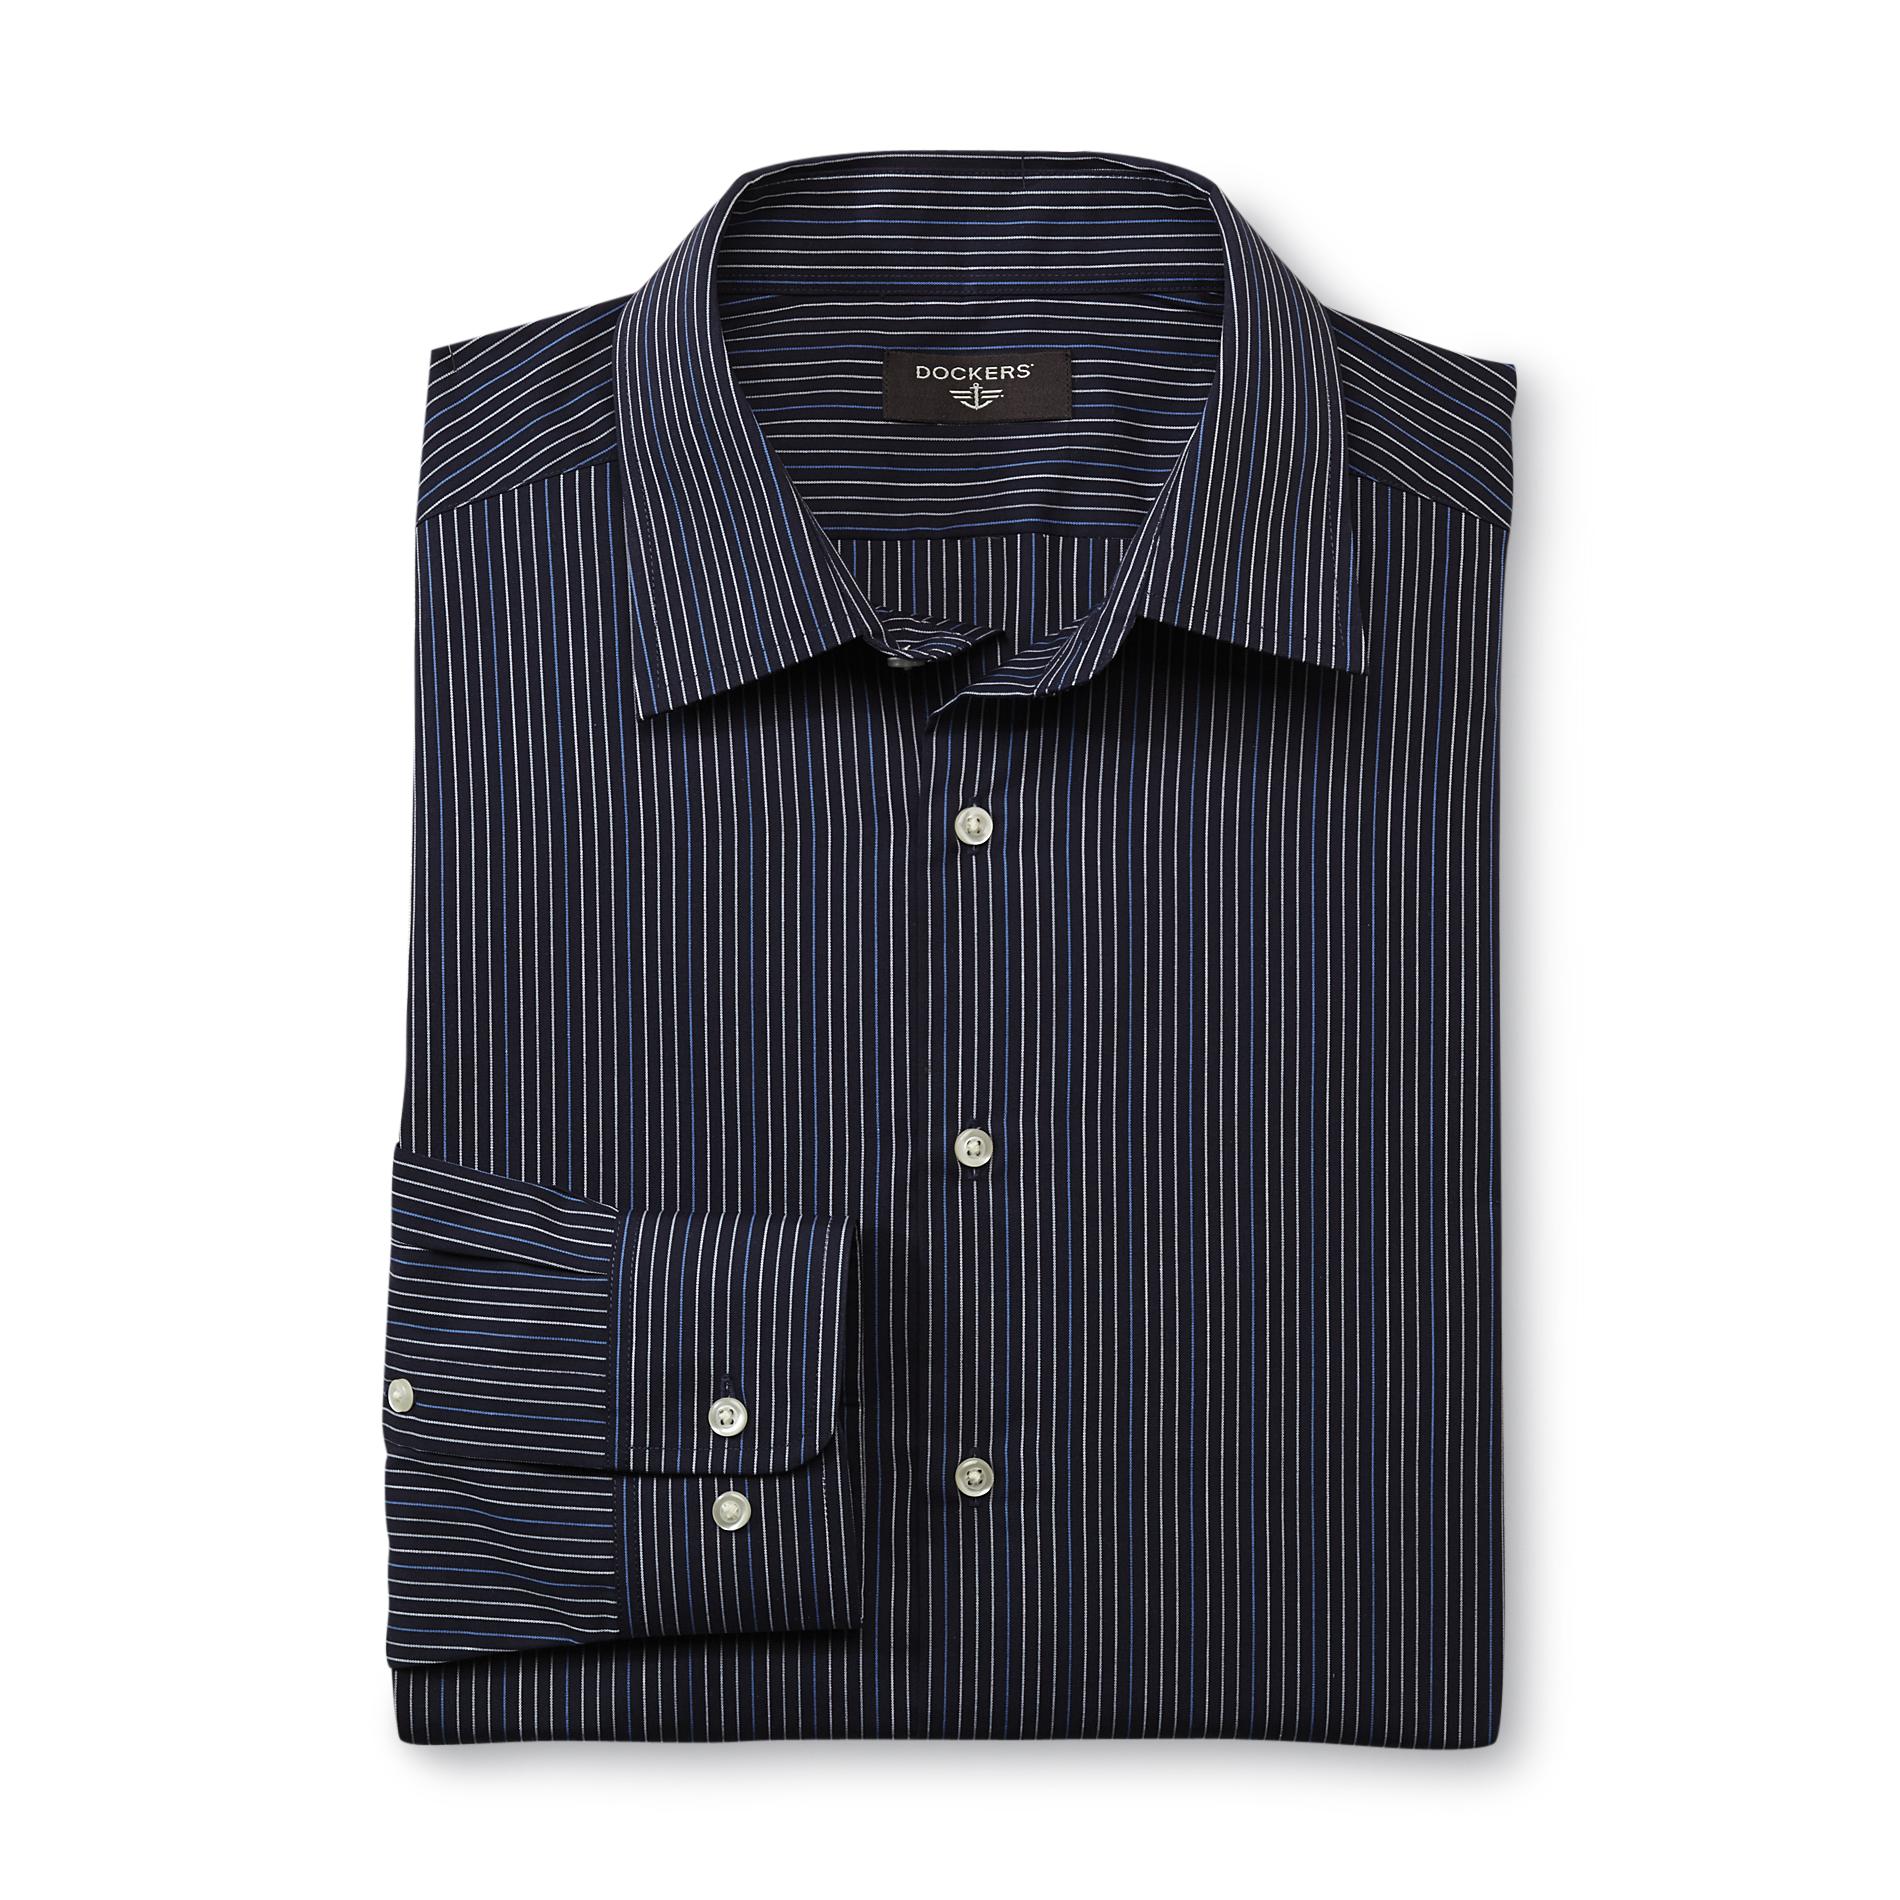 Men's Fitted Dress Shirt - Striped